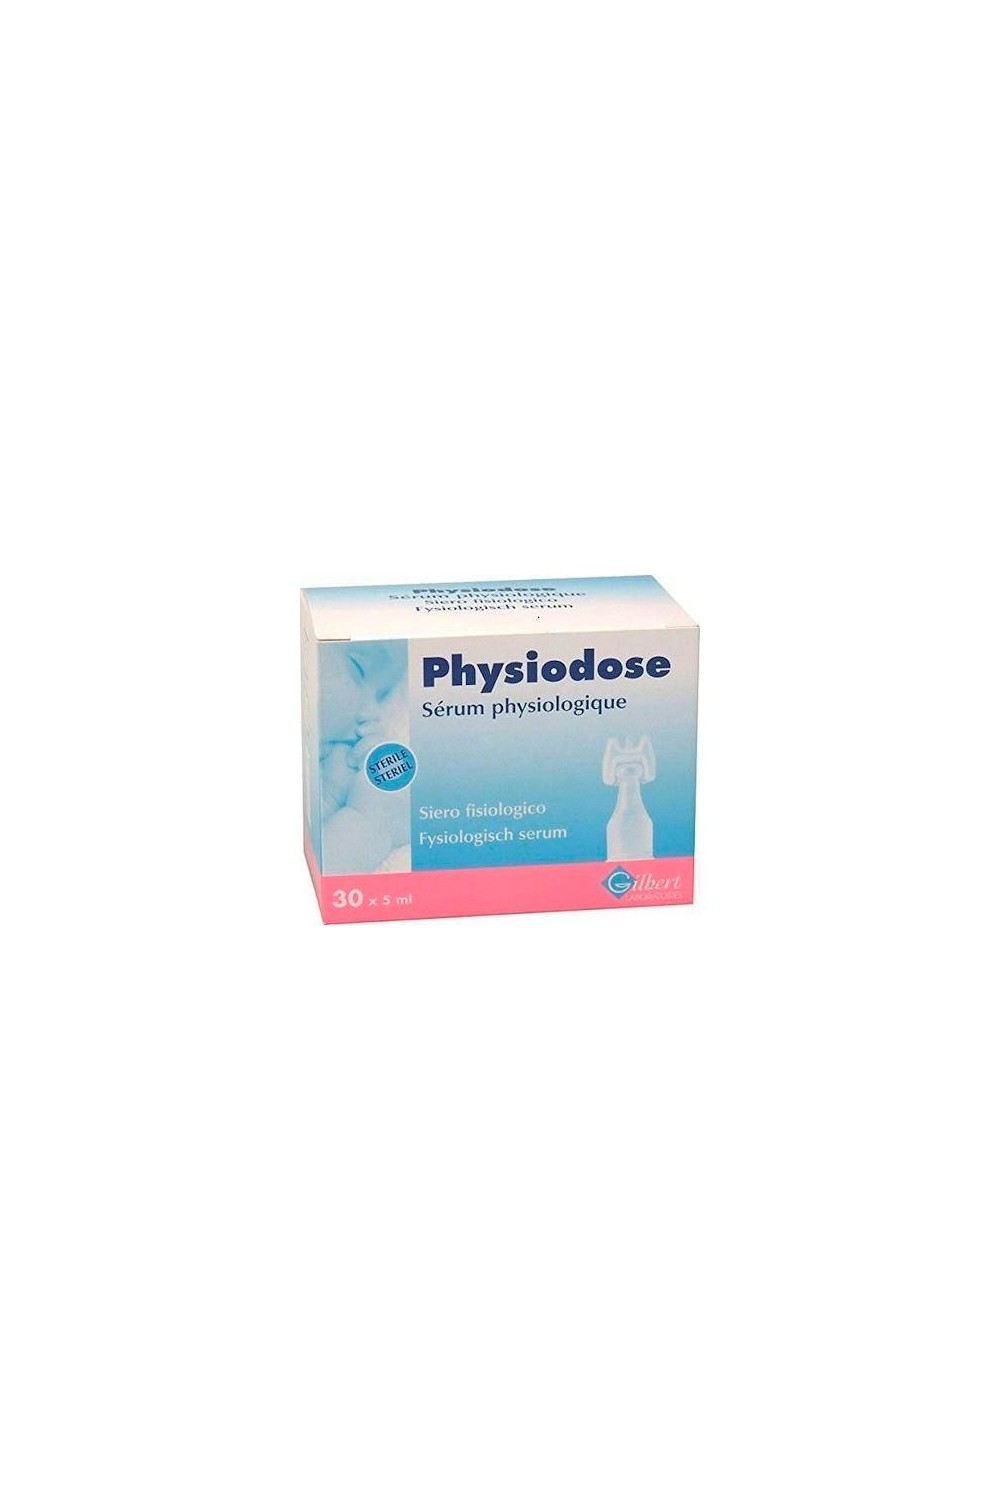 GILBERT - Phisiodose Physiological Serum 30 Units